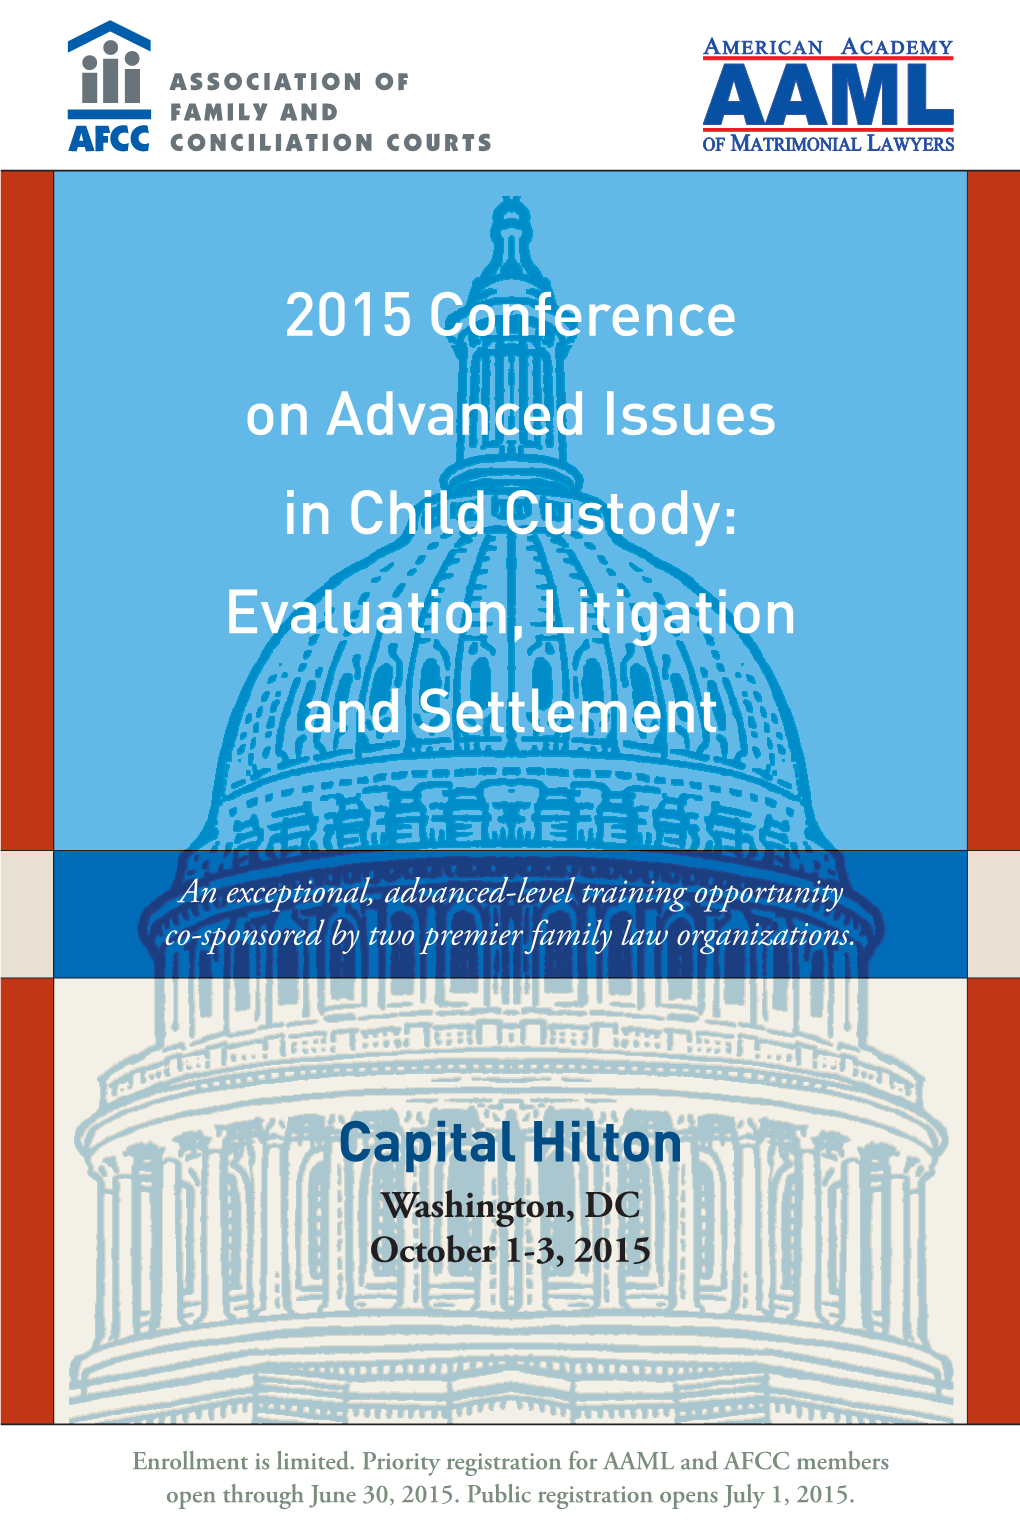 2015 Conference on Advanced Issues in Child Custody: Evaluation, Litigation and Settlement